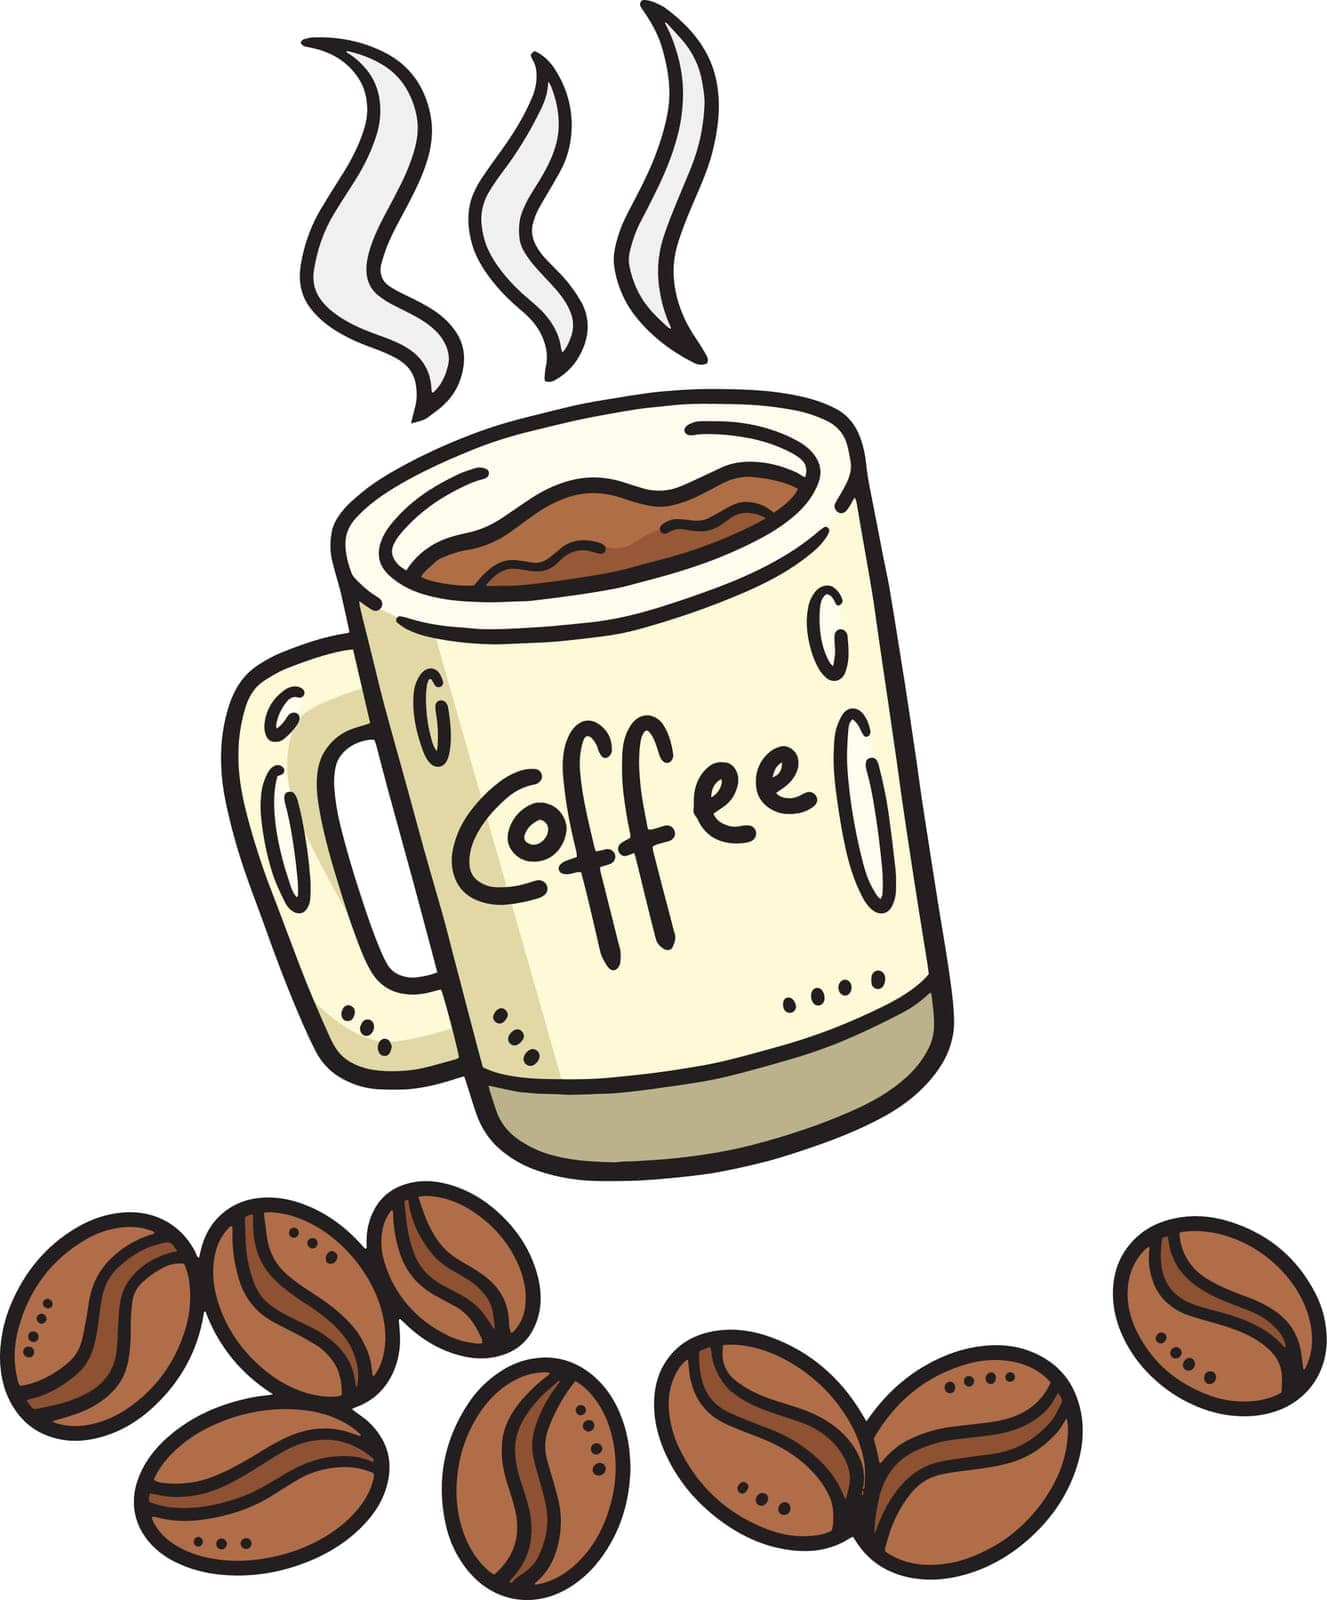 This cartoon clipart shows a Mug with Coffee and Coffee Beans illustration.